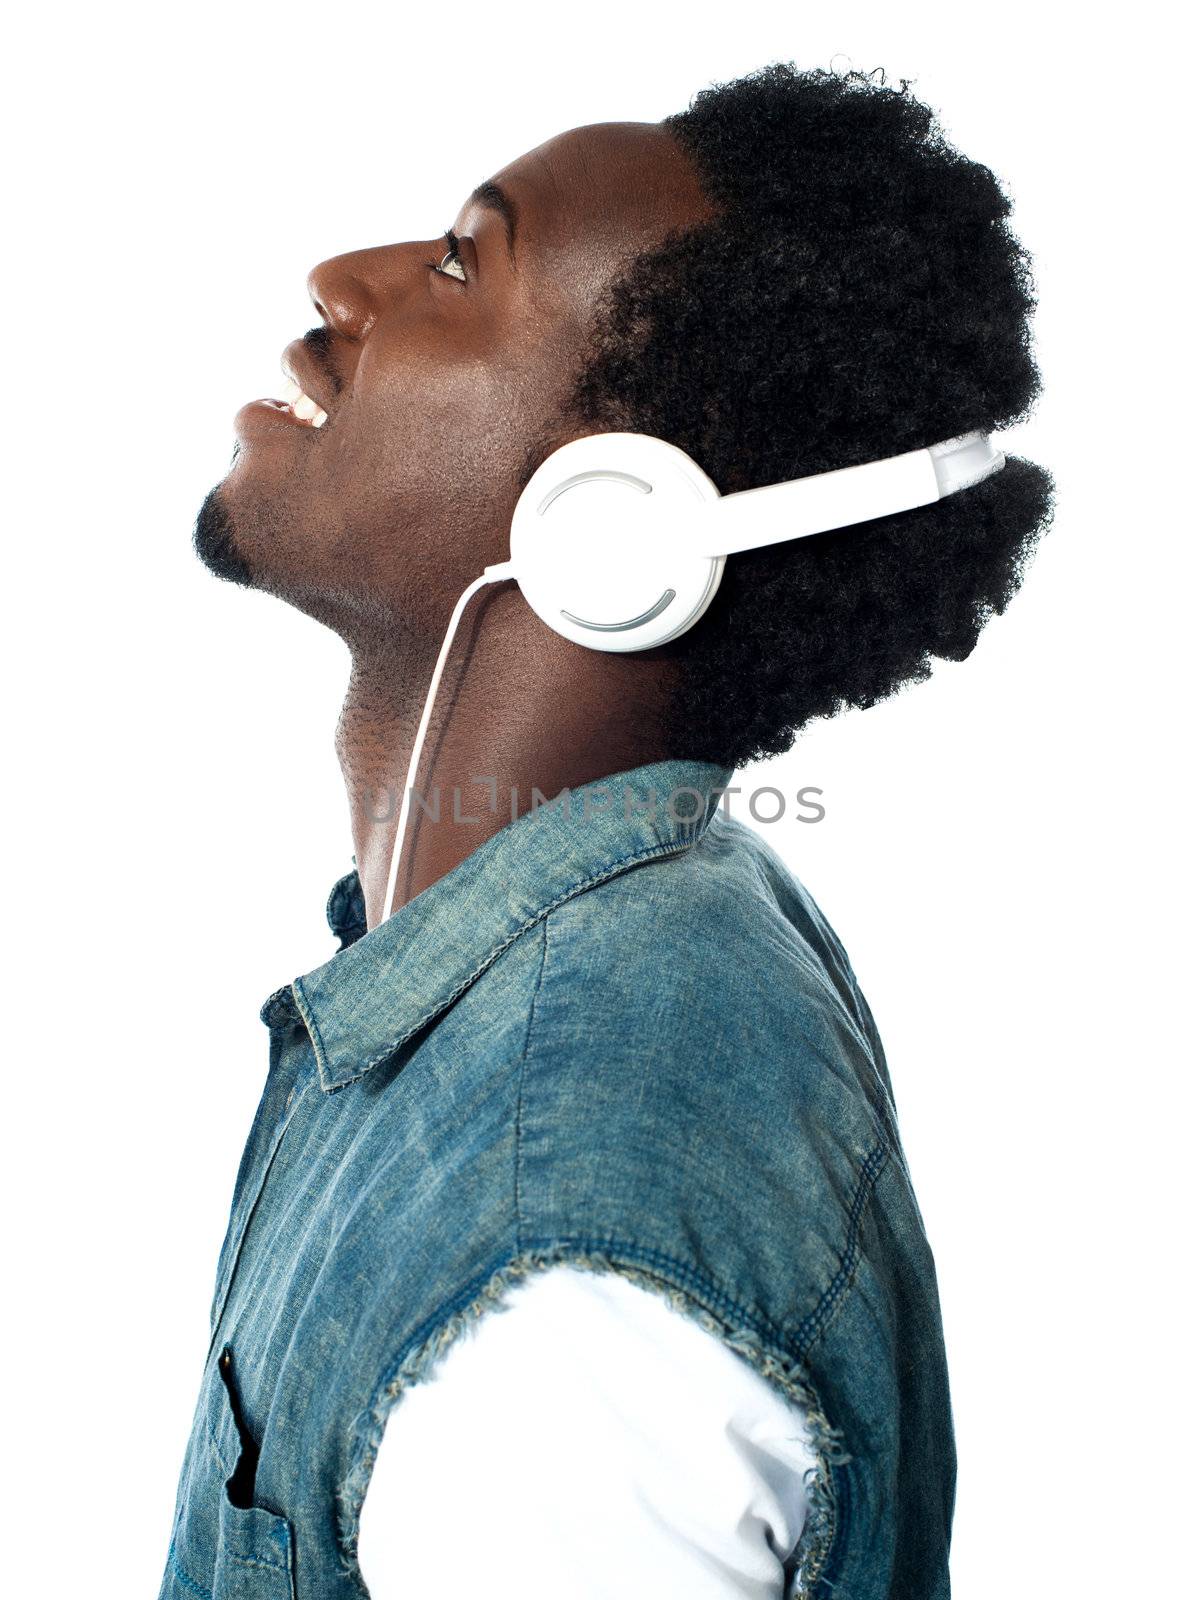 A handsome young boy listening to music on his mp3 player, looking up